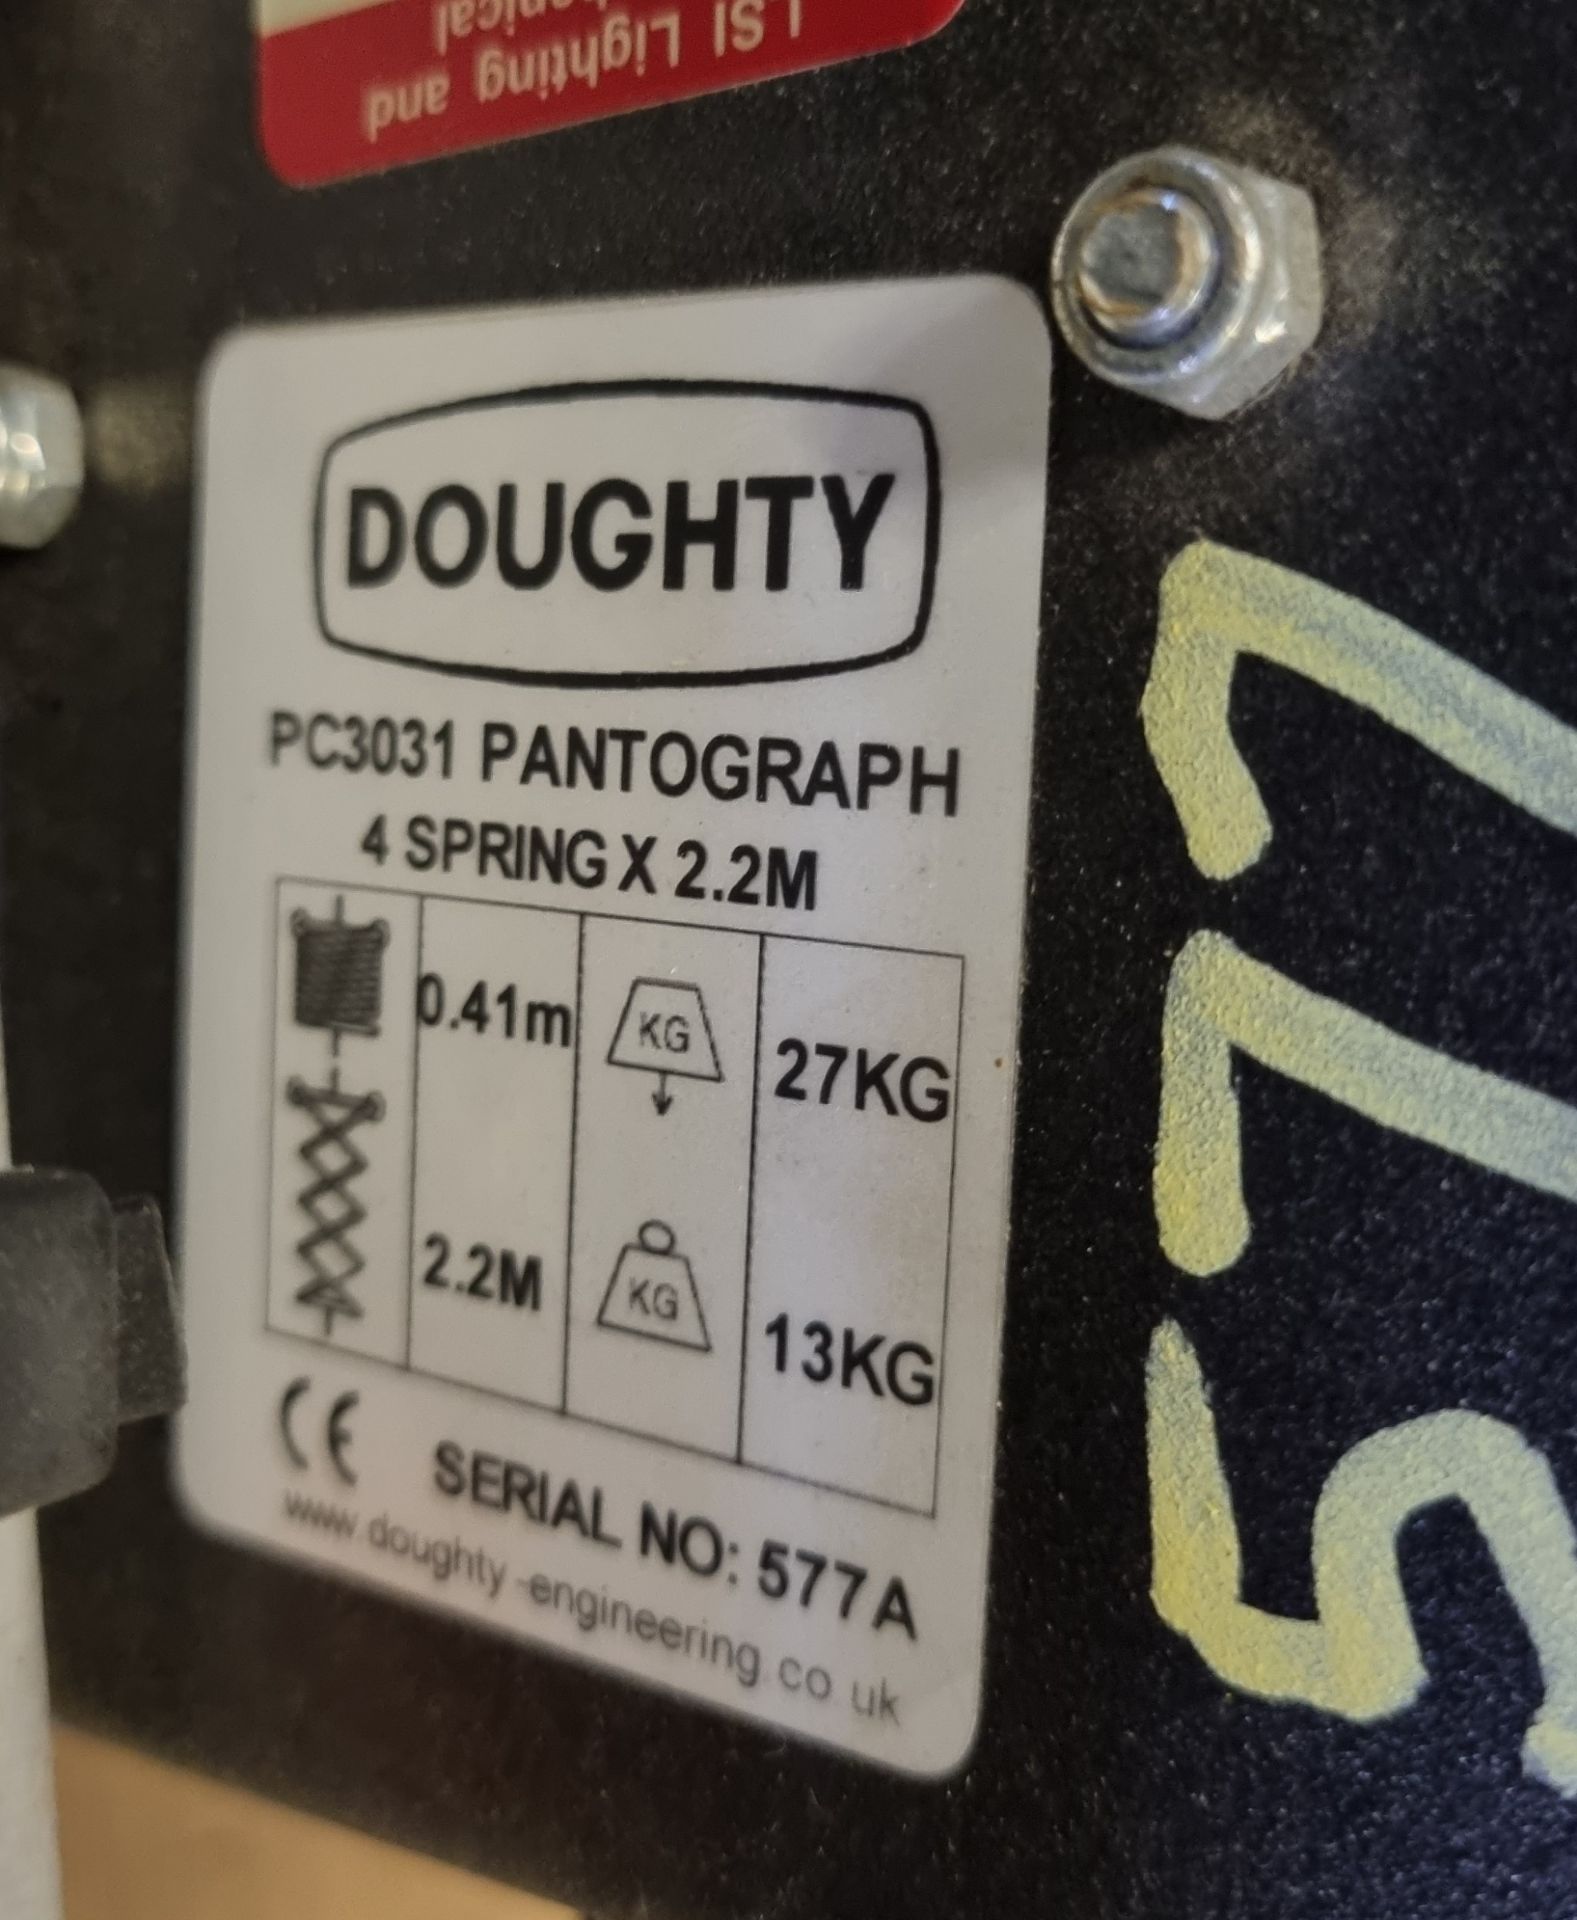 Doughty pantograph with 240V power supply - W 420 x D 150 x H 410 mm, Stage lighting pantograph - Image 4 of 5